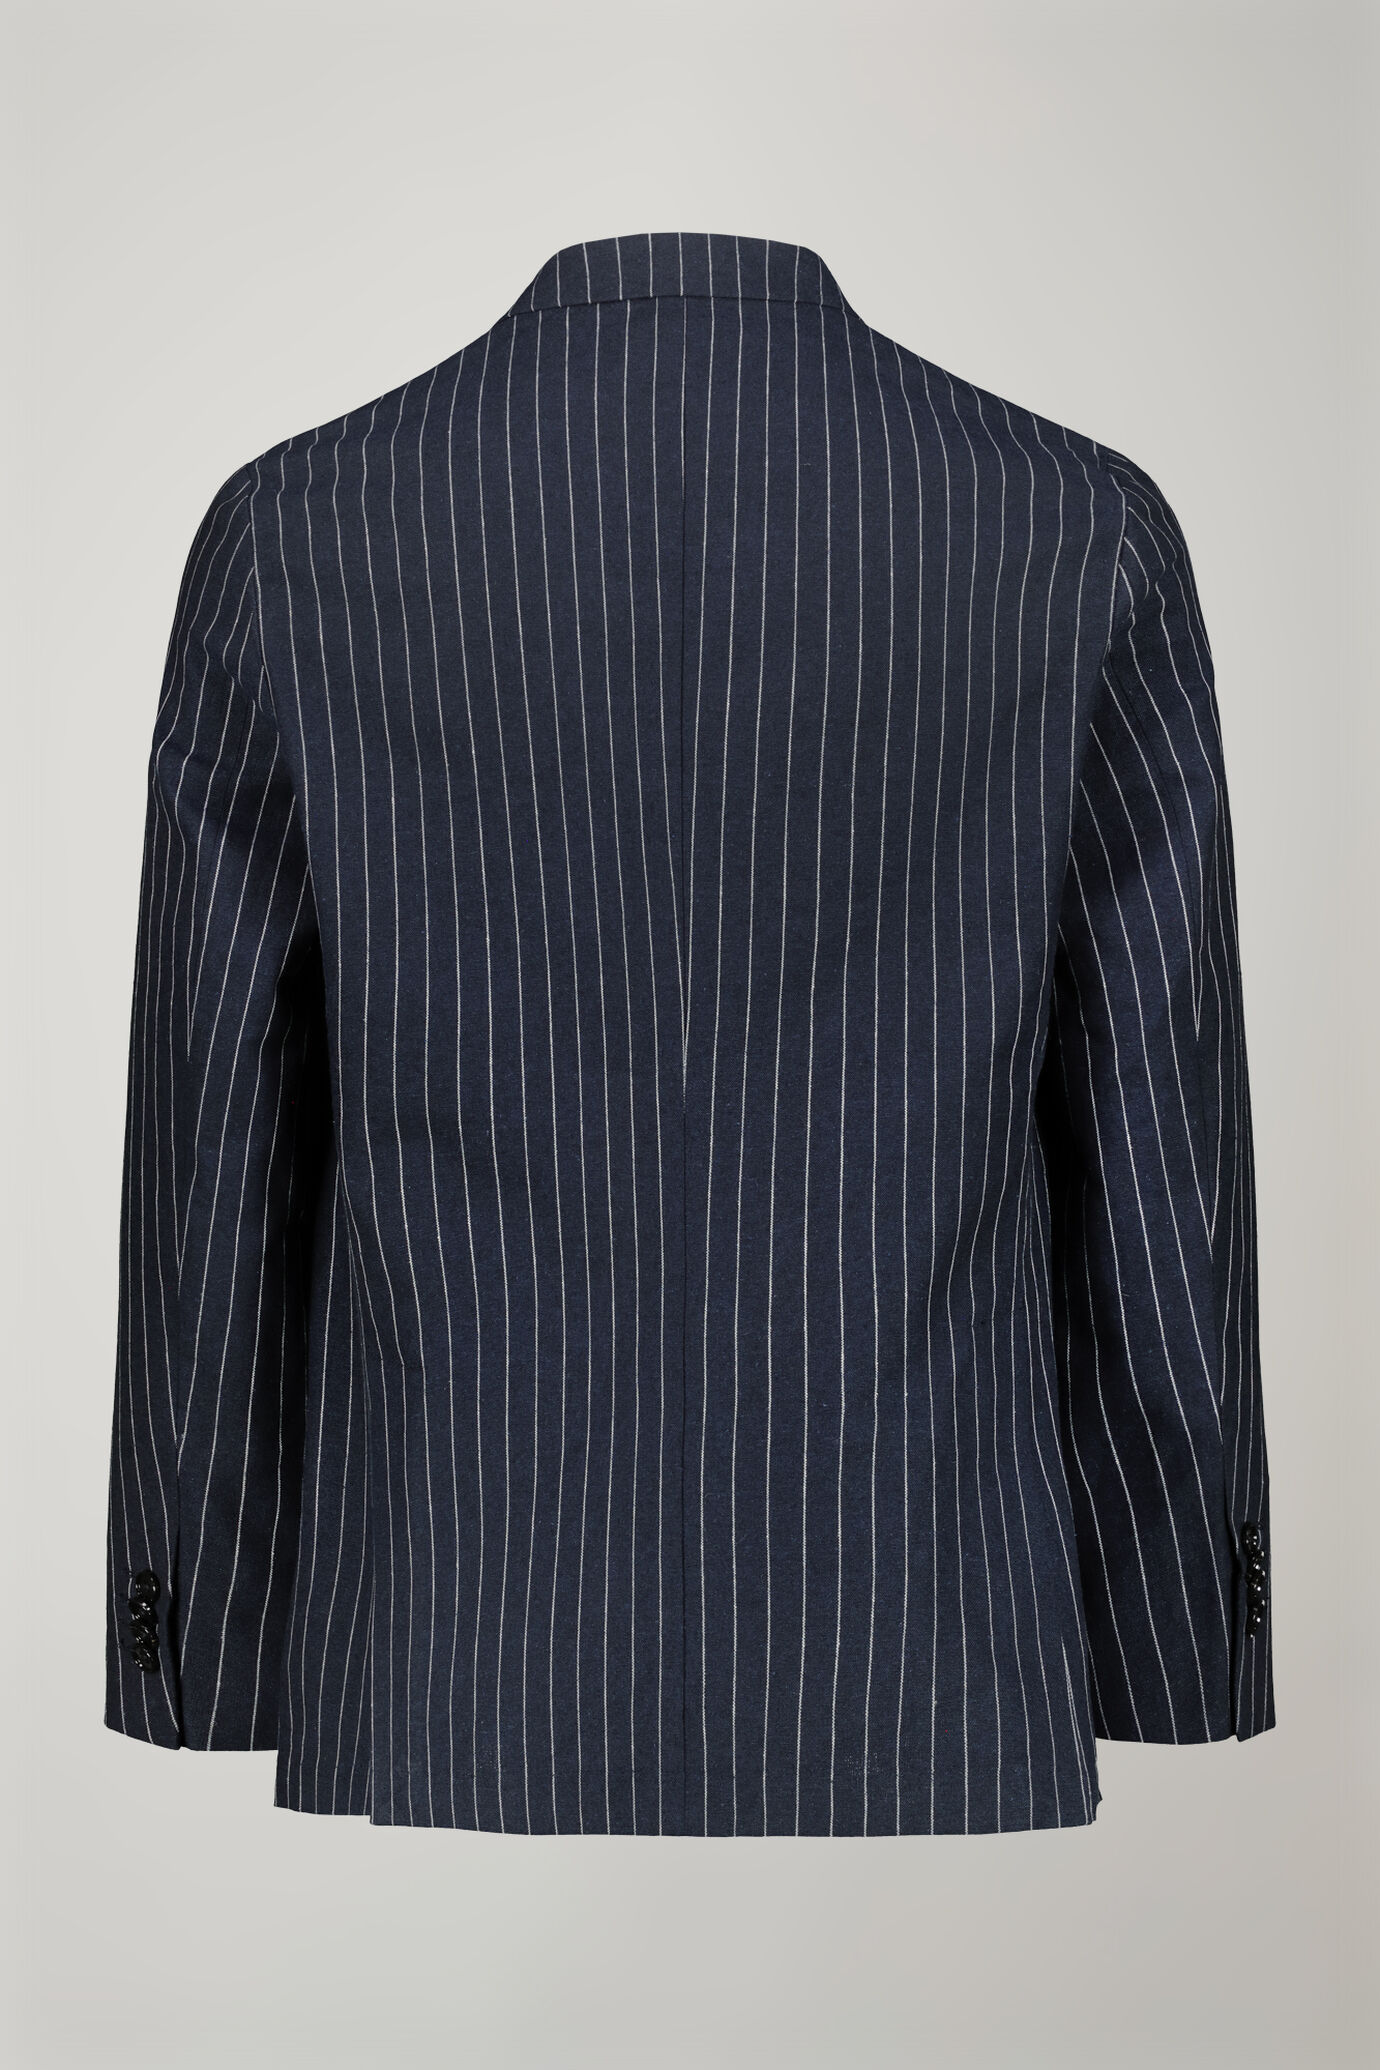 Men's unlined double-breasted blazer with spread collar and flap pockets linen and cotton fabric with regular fit pinstripe design image number 5